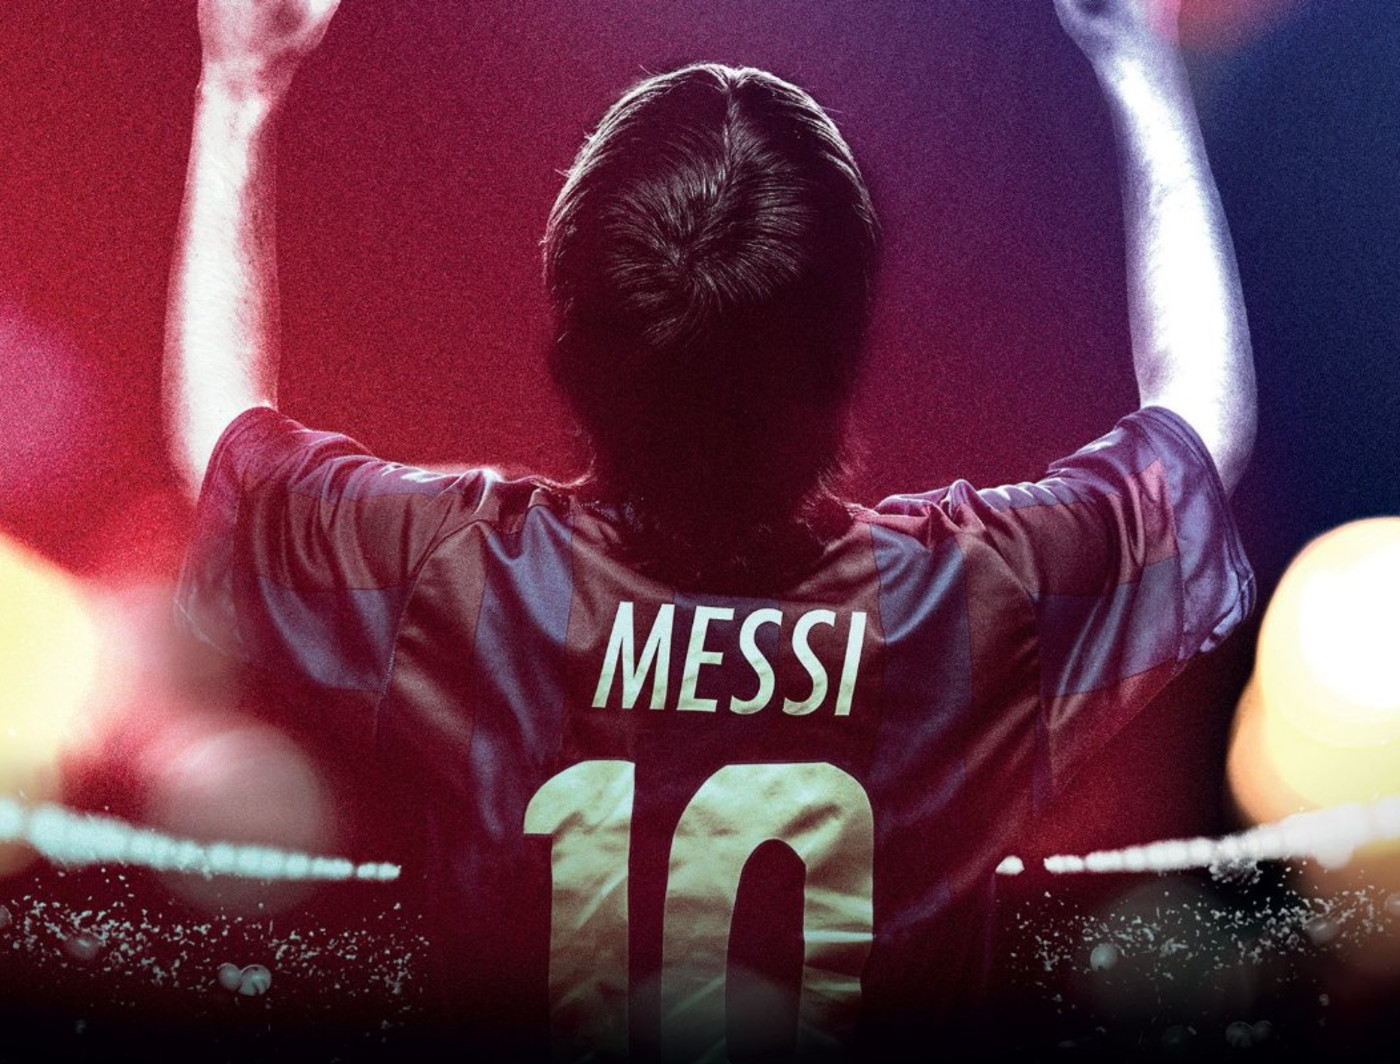 Watch an Exclusive Clip from New Documentary 'Messi' Complex